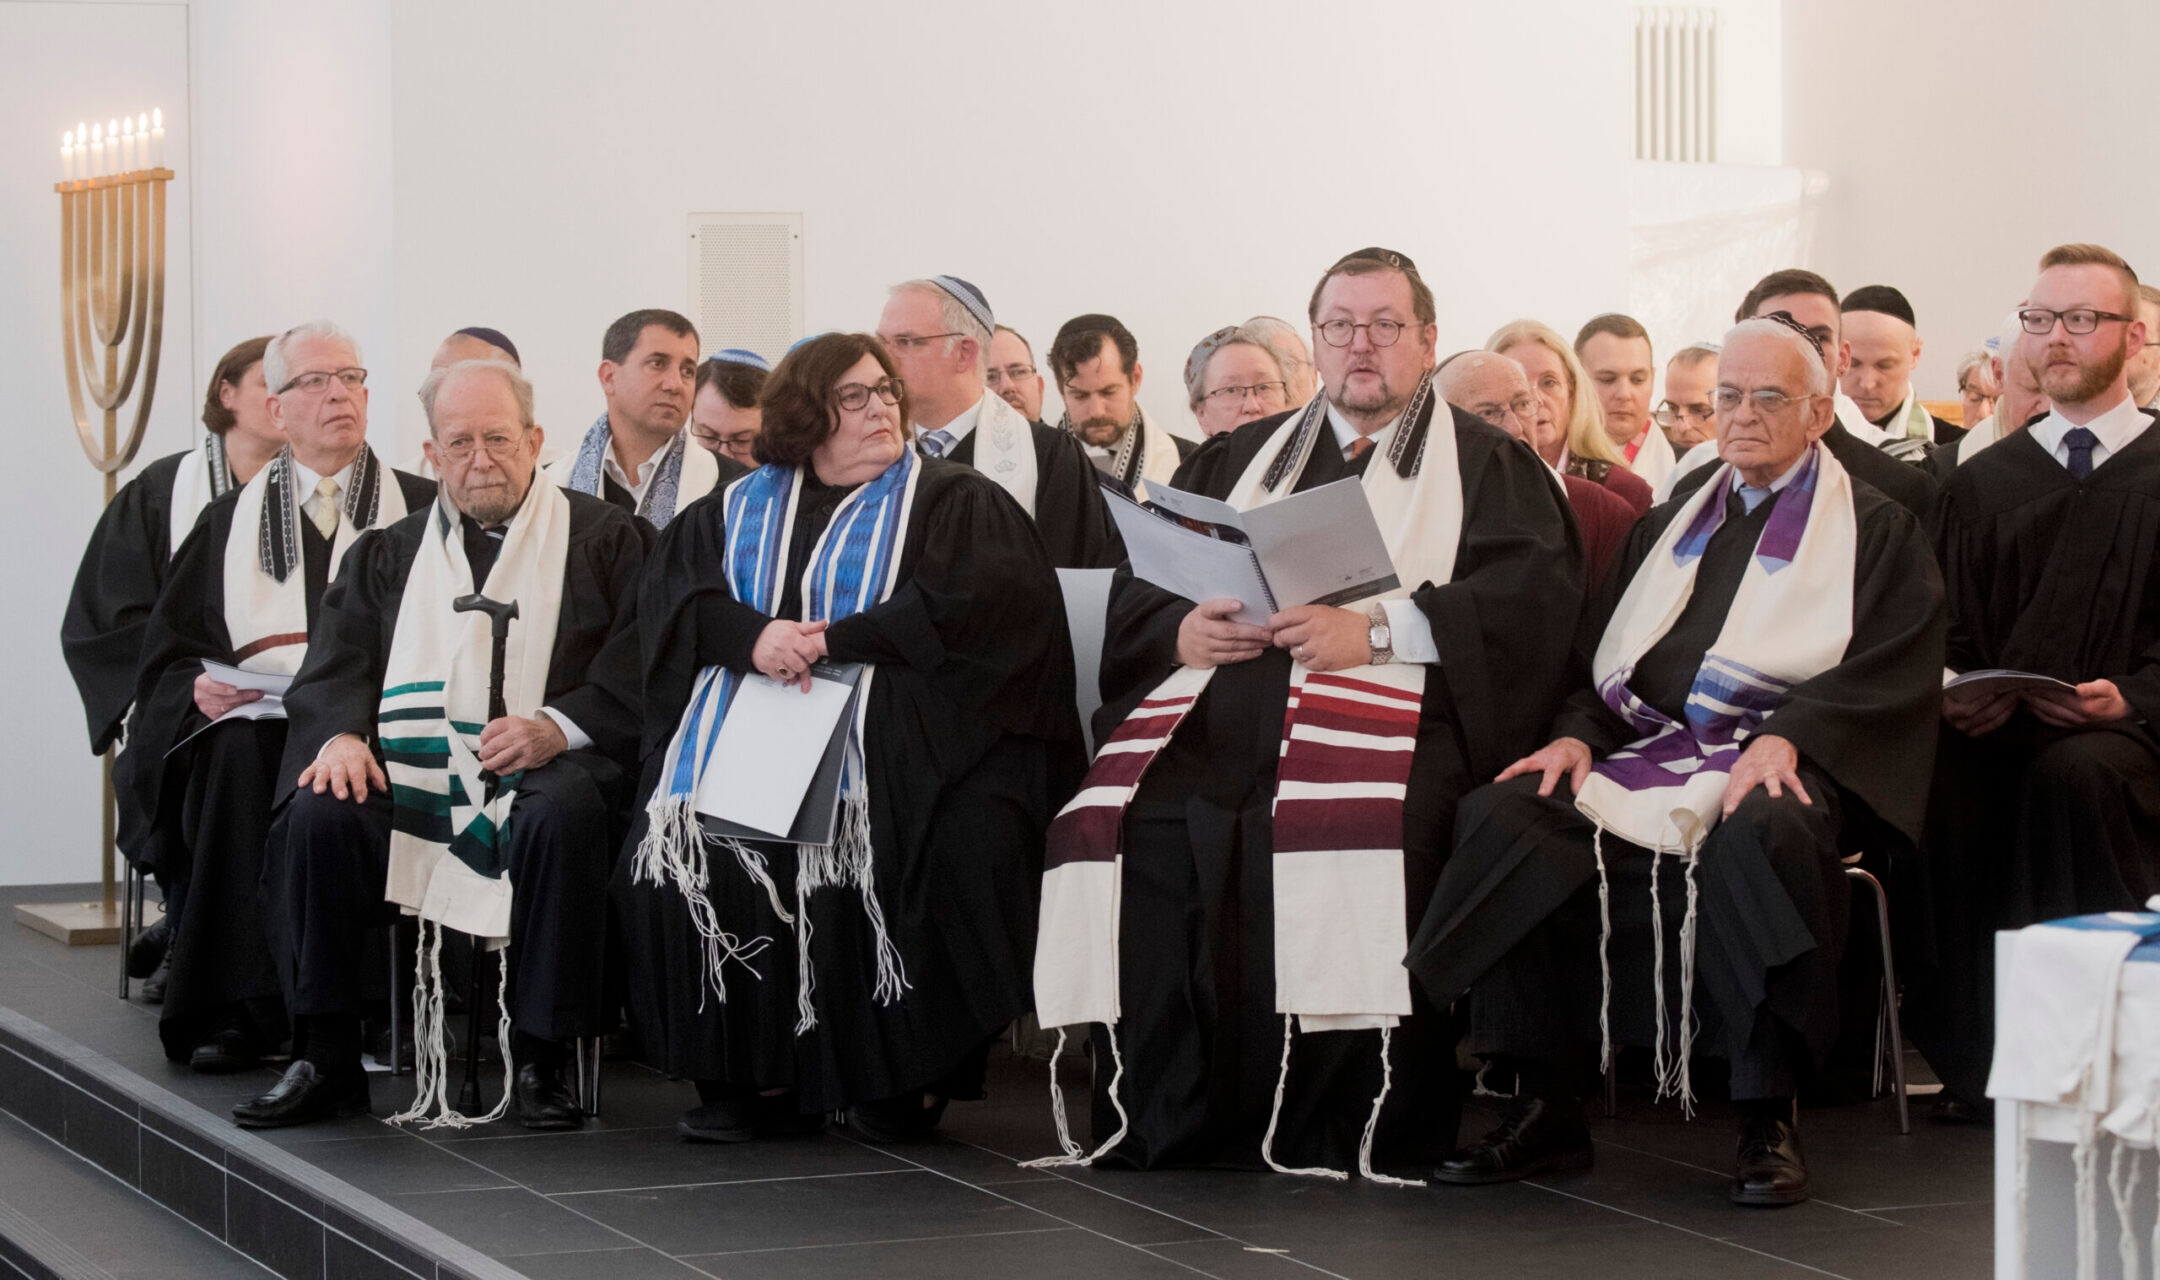 Investigations and resignations pile up amid mounting scandal within German liberal Judaism